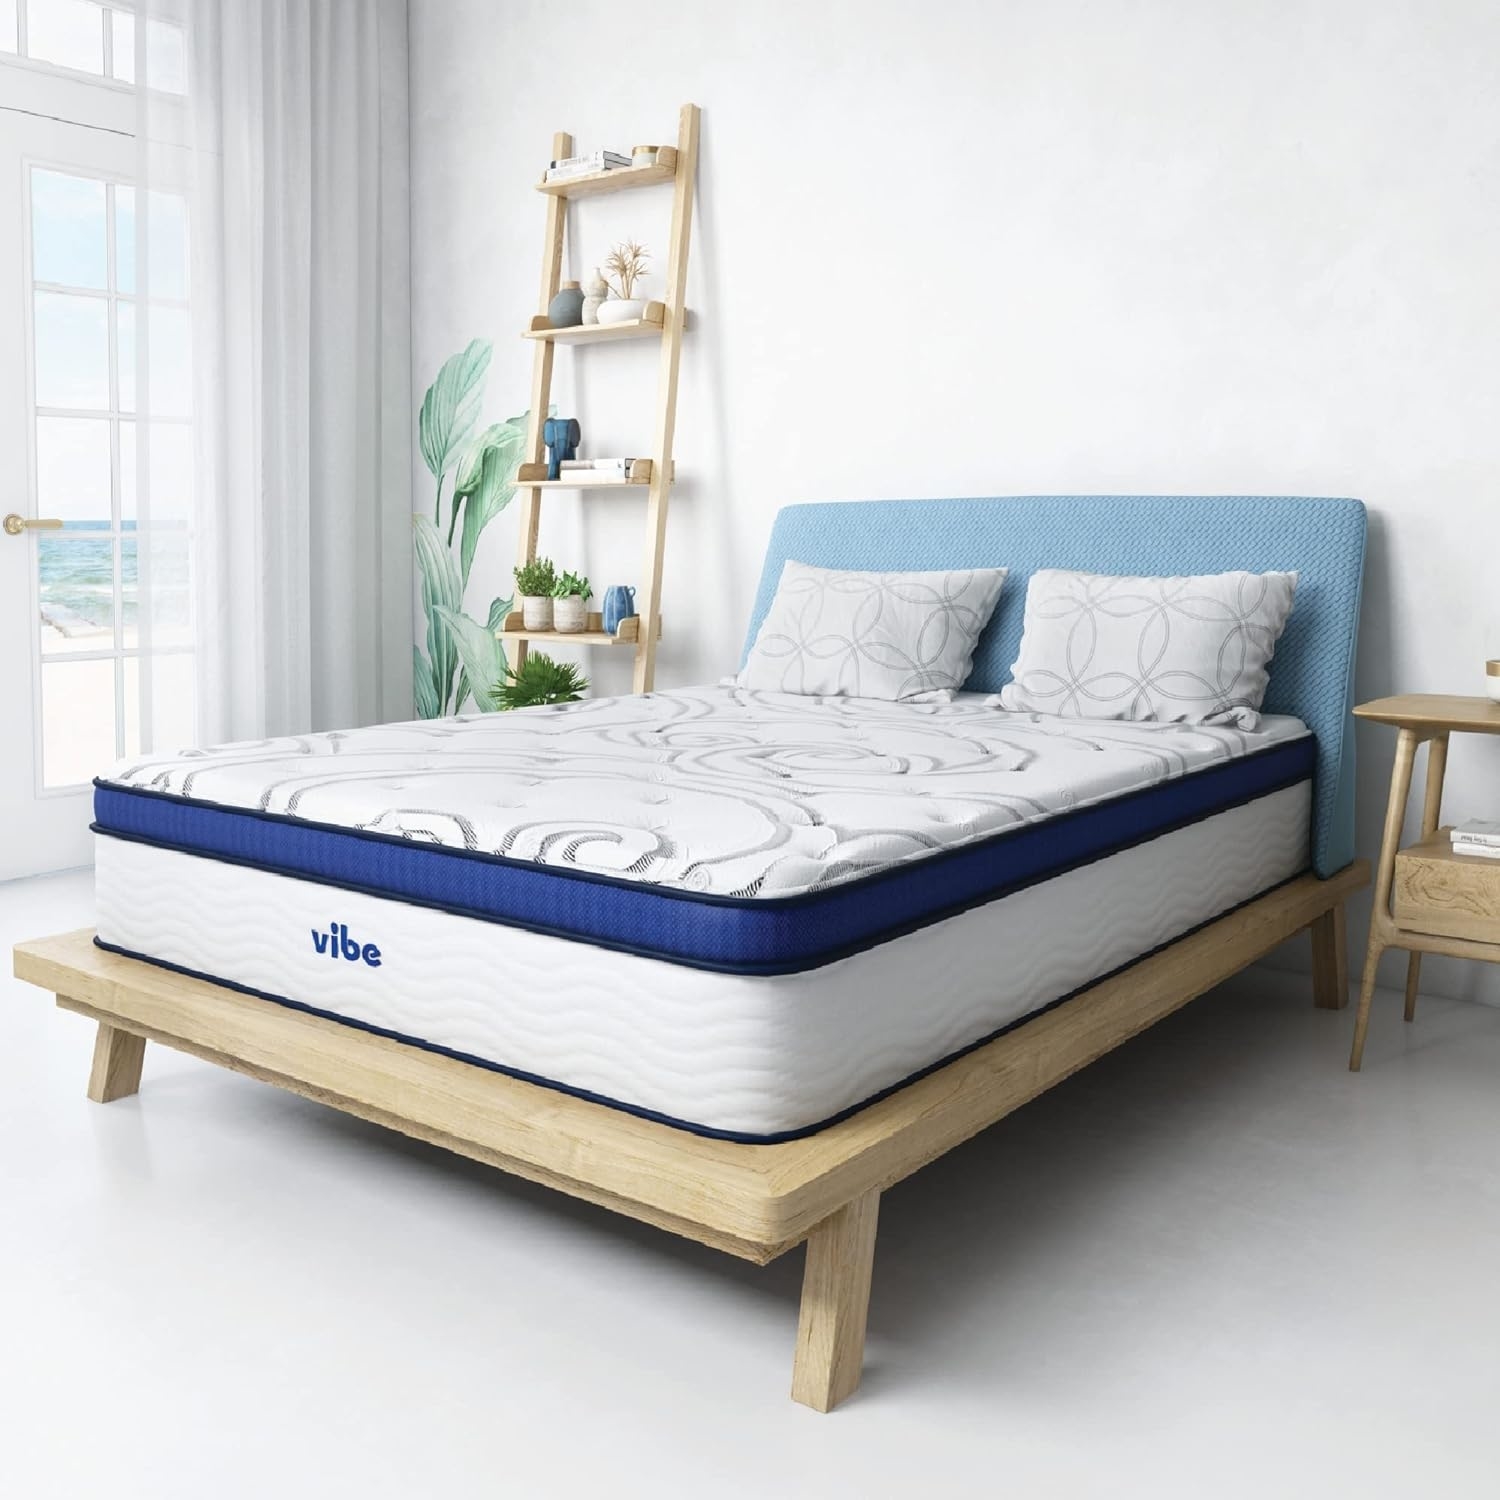 A Vibe branded mattress on a simple wooden bed frame in a bright, modern bedroom setup